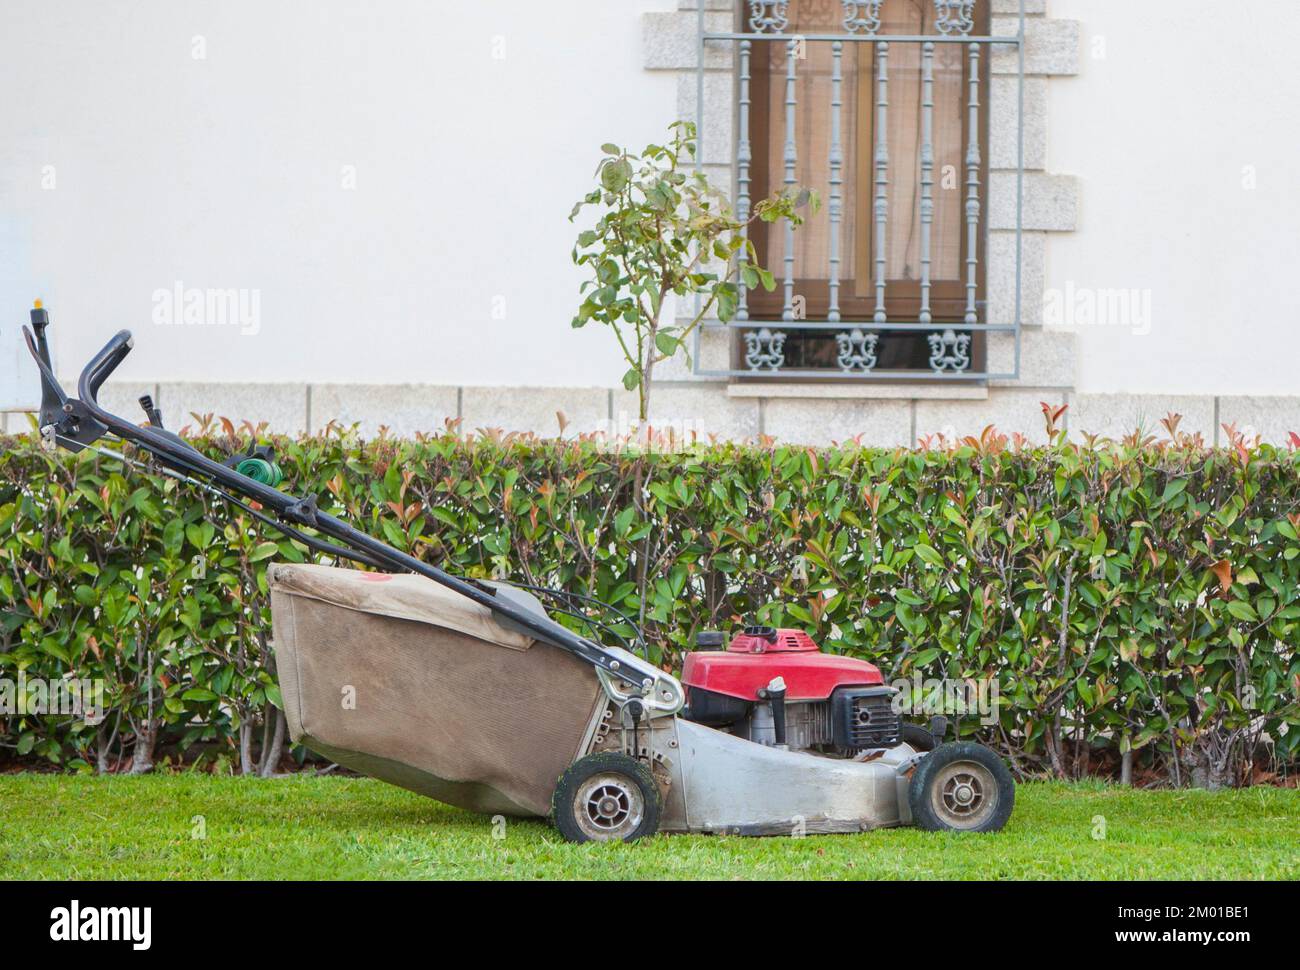 Lawn mower close to hedge. Landscaped sidewalks concept. Stock Photo